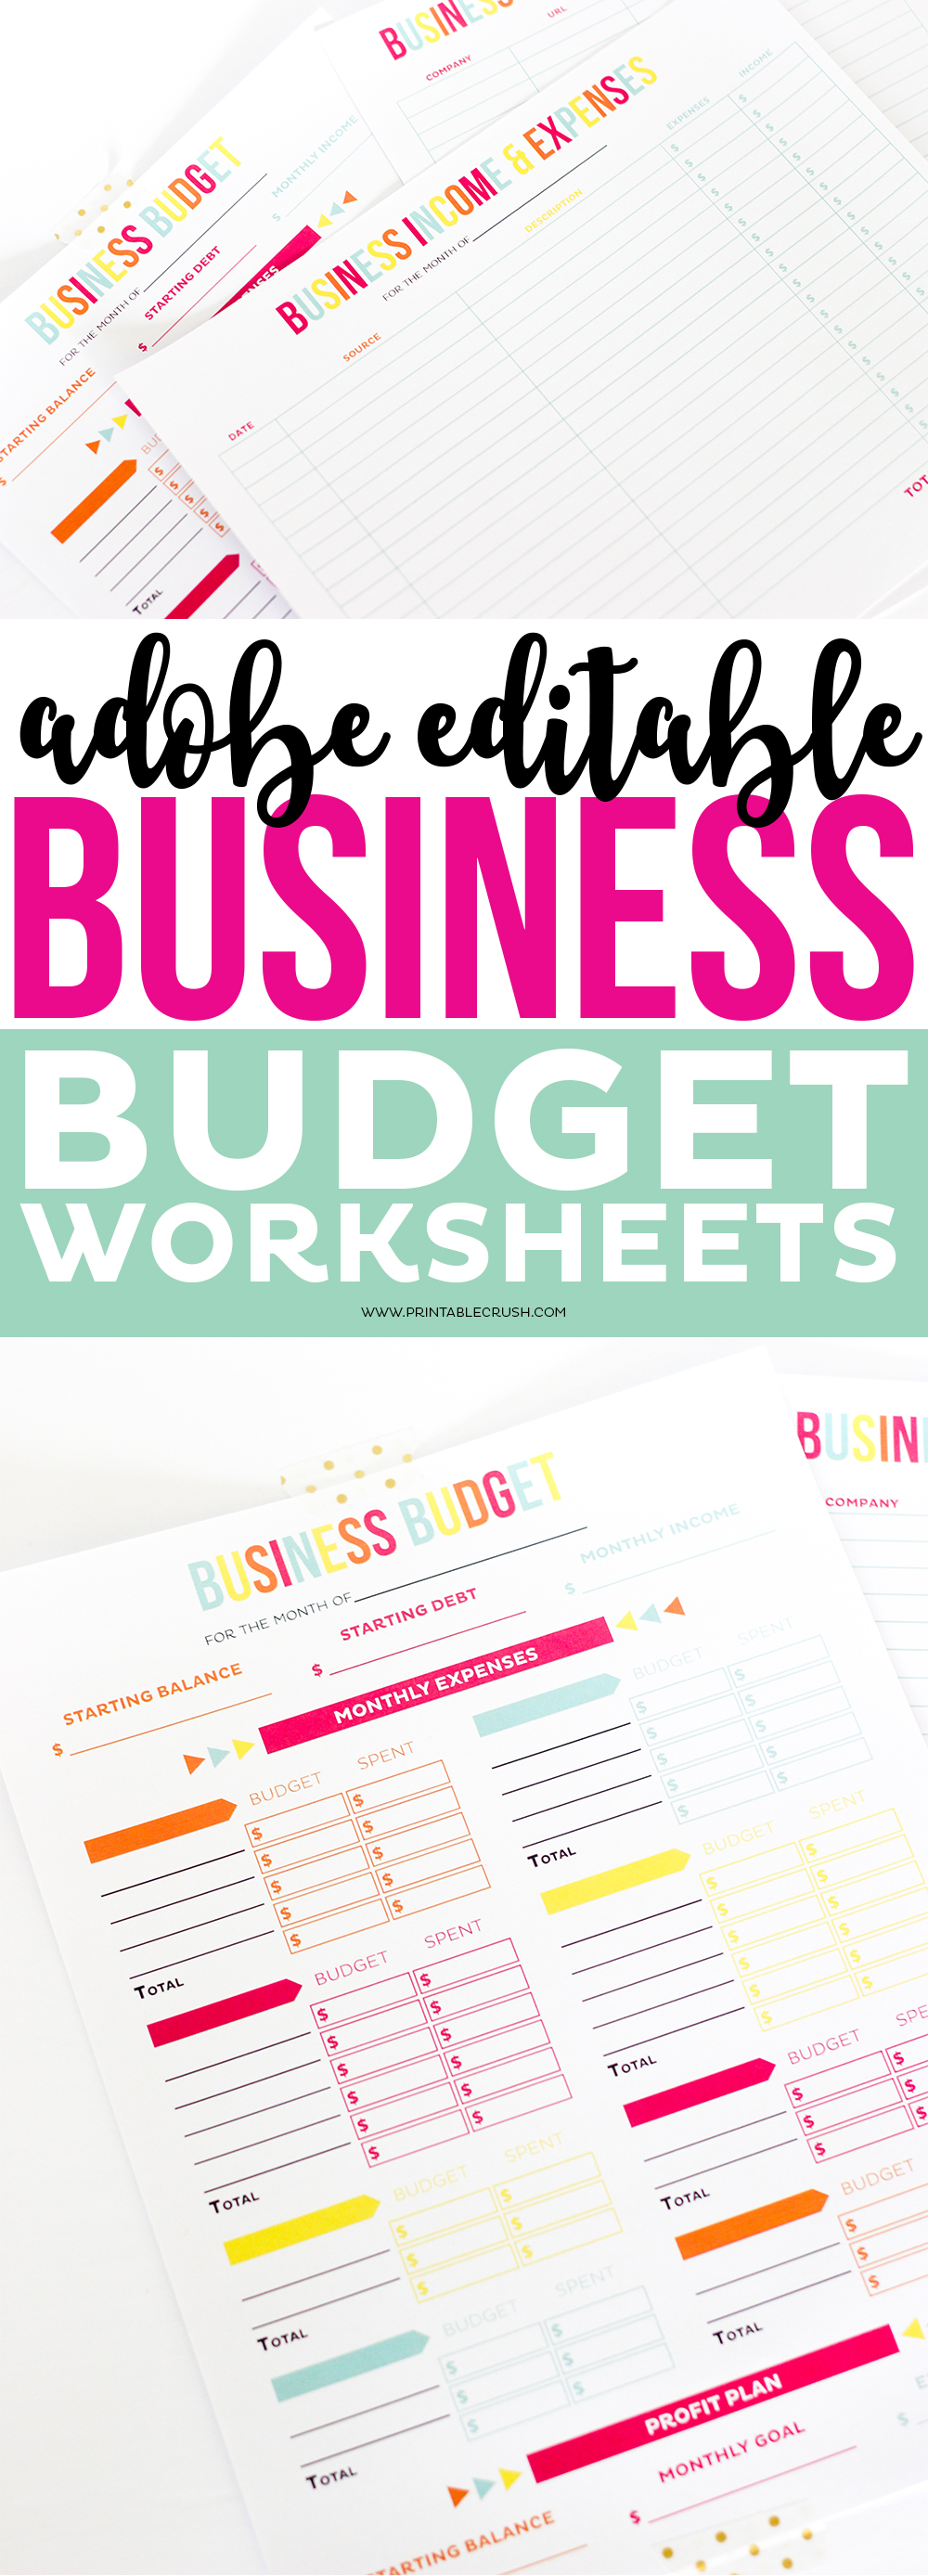 Make tax time a little less confusing with these Editable Printable Business Budge Worksheets! Includes expense and income track sheet, budget sheet, and a bonus password tracker for your online business accounts!